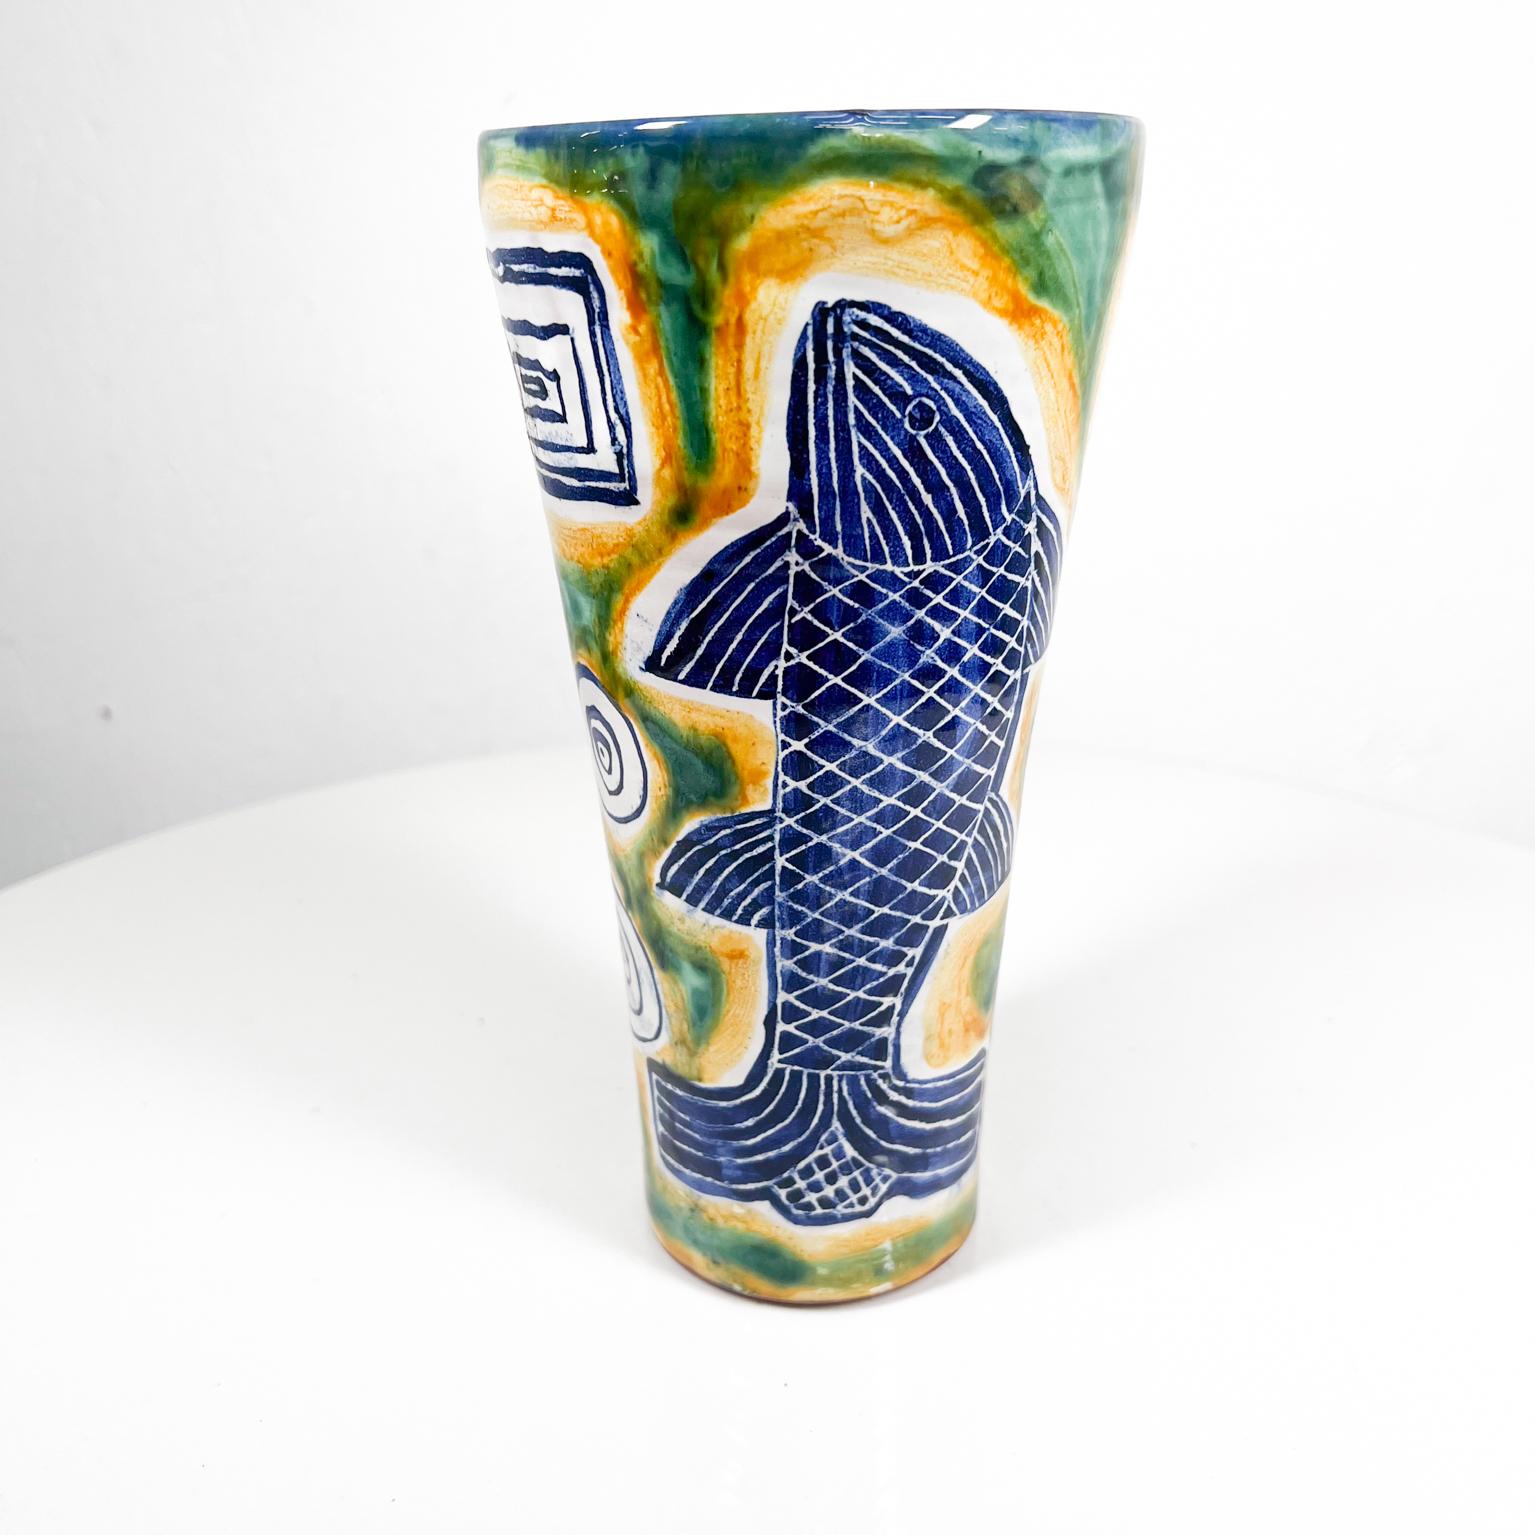 1997 Modern Blue and Green Fish Pottery Vase 
8.75 H x 4.5 diameter
Hand painted colorful fish design.
Signed at bottom. M M 97
Preowned vintage condition.

See all images please.

